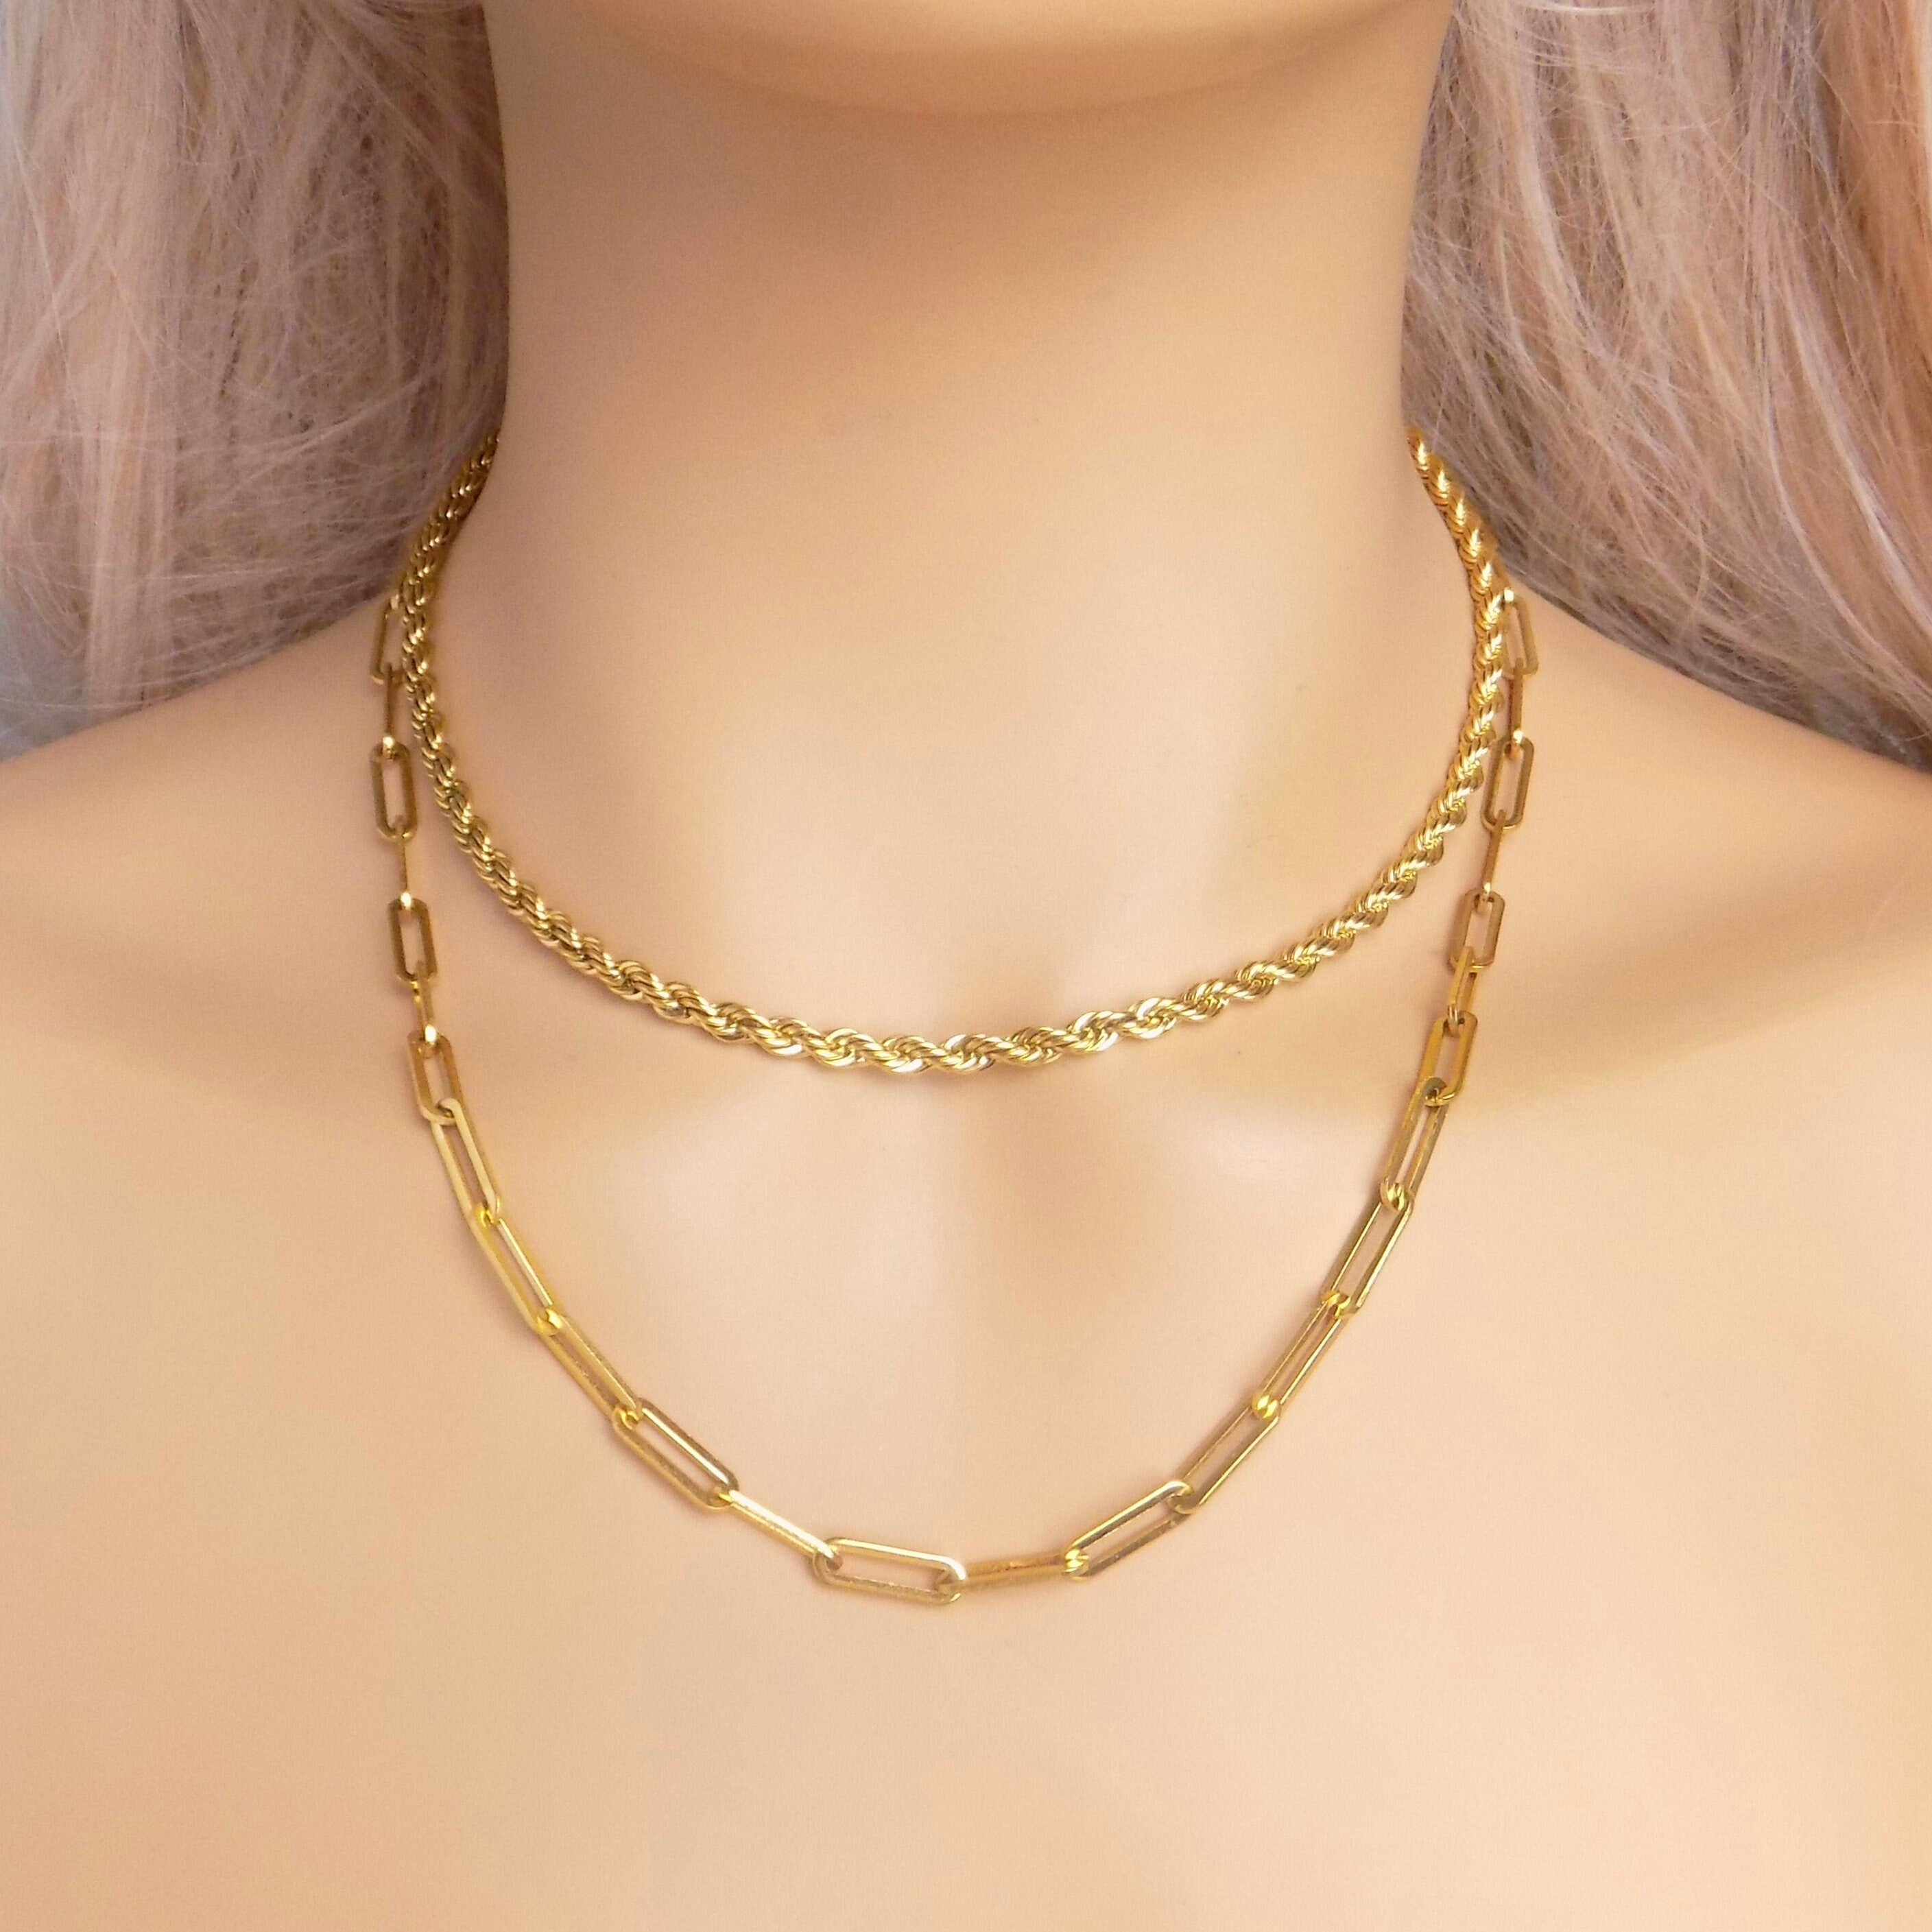 Men's Gold Chunky T-Bar Curb Link Necklace - Tilly Sveaas Jewellery